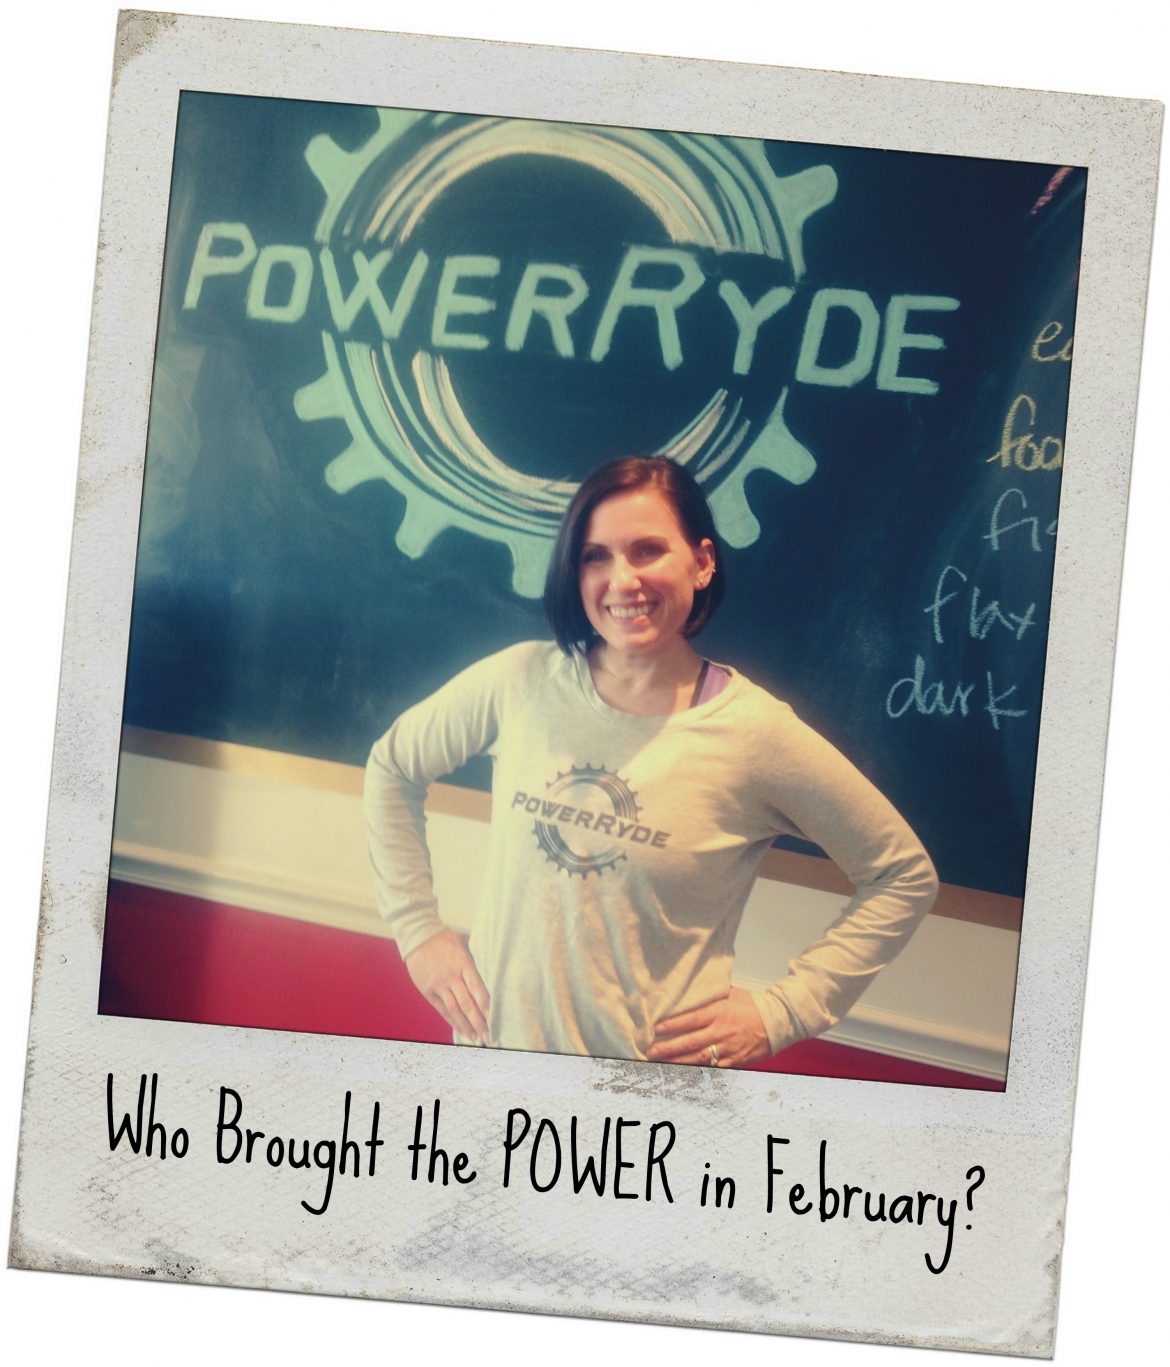 Polaroid style picture of Amber Hedrick with 'Who Brought the POWER in February'?